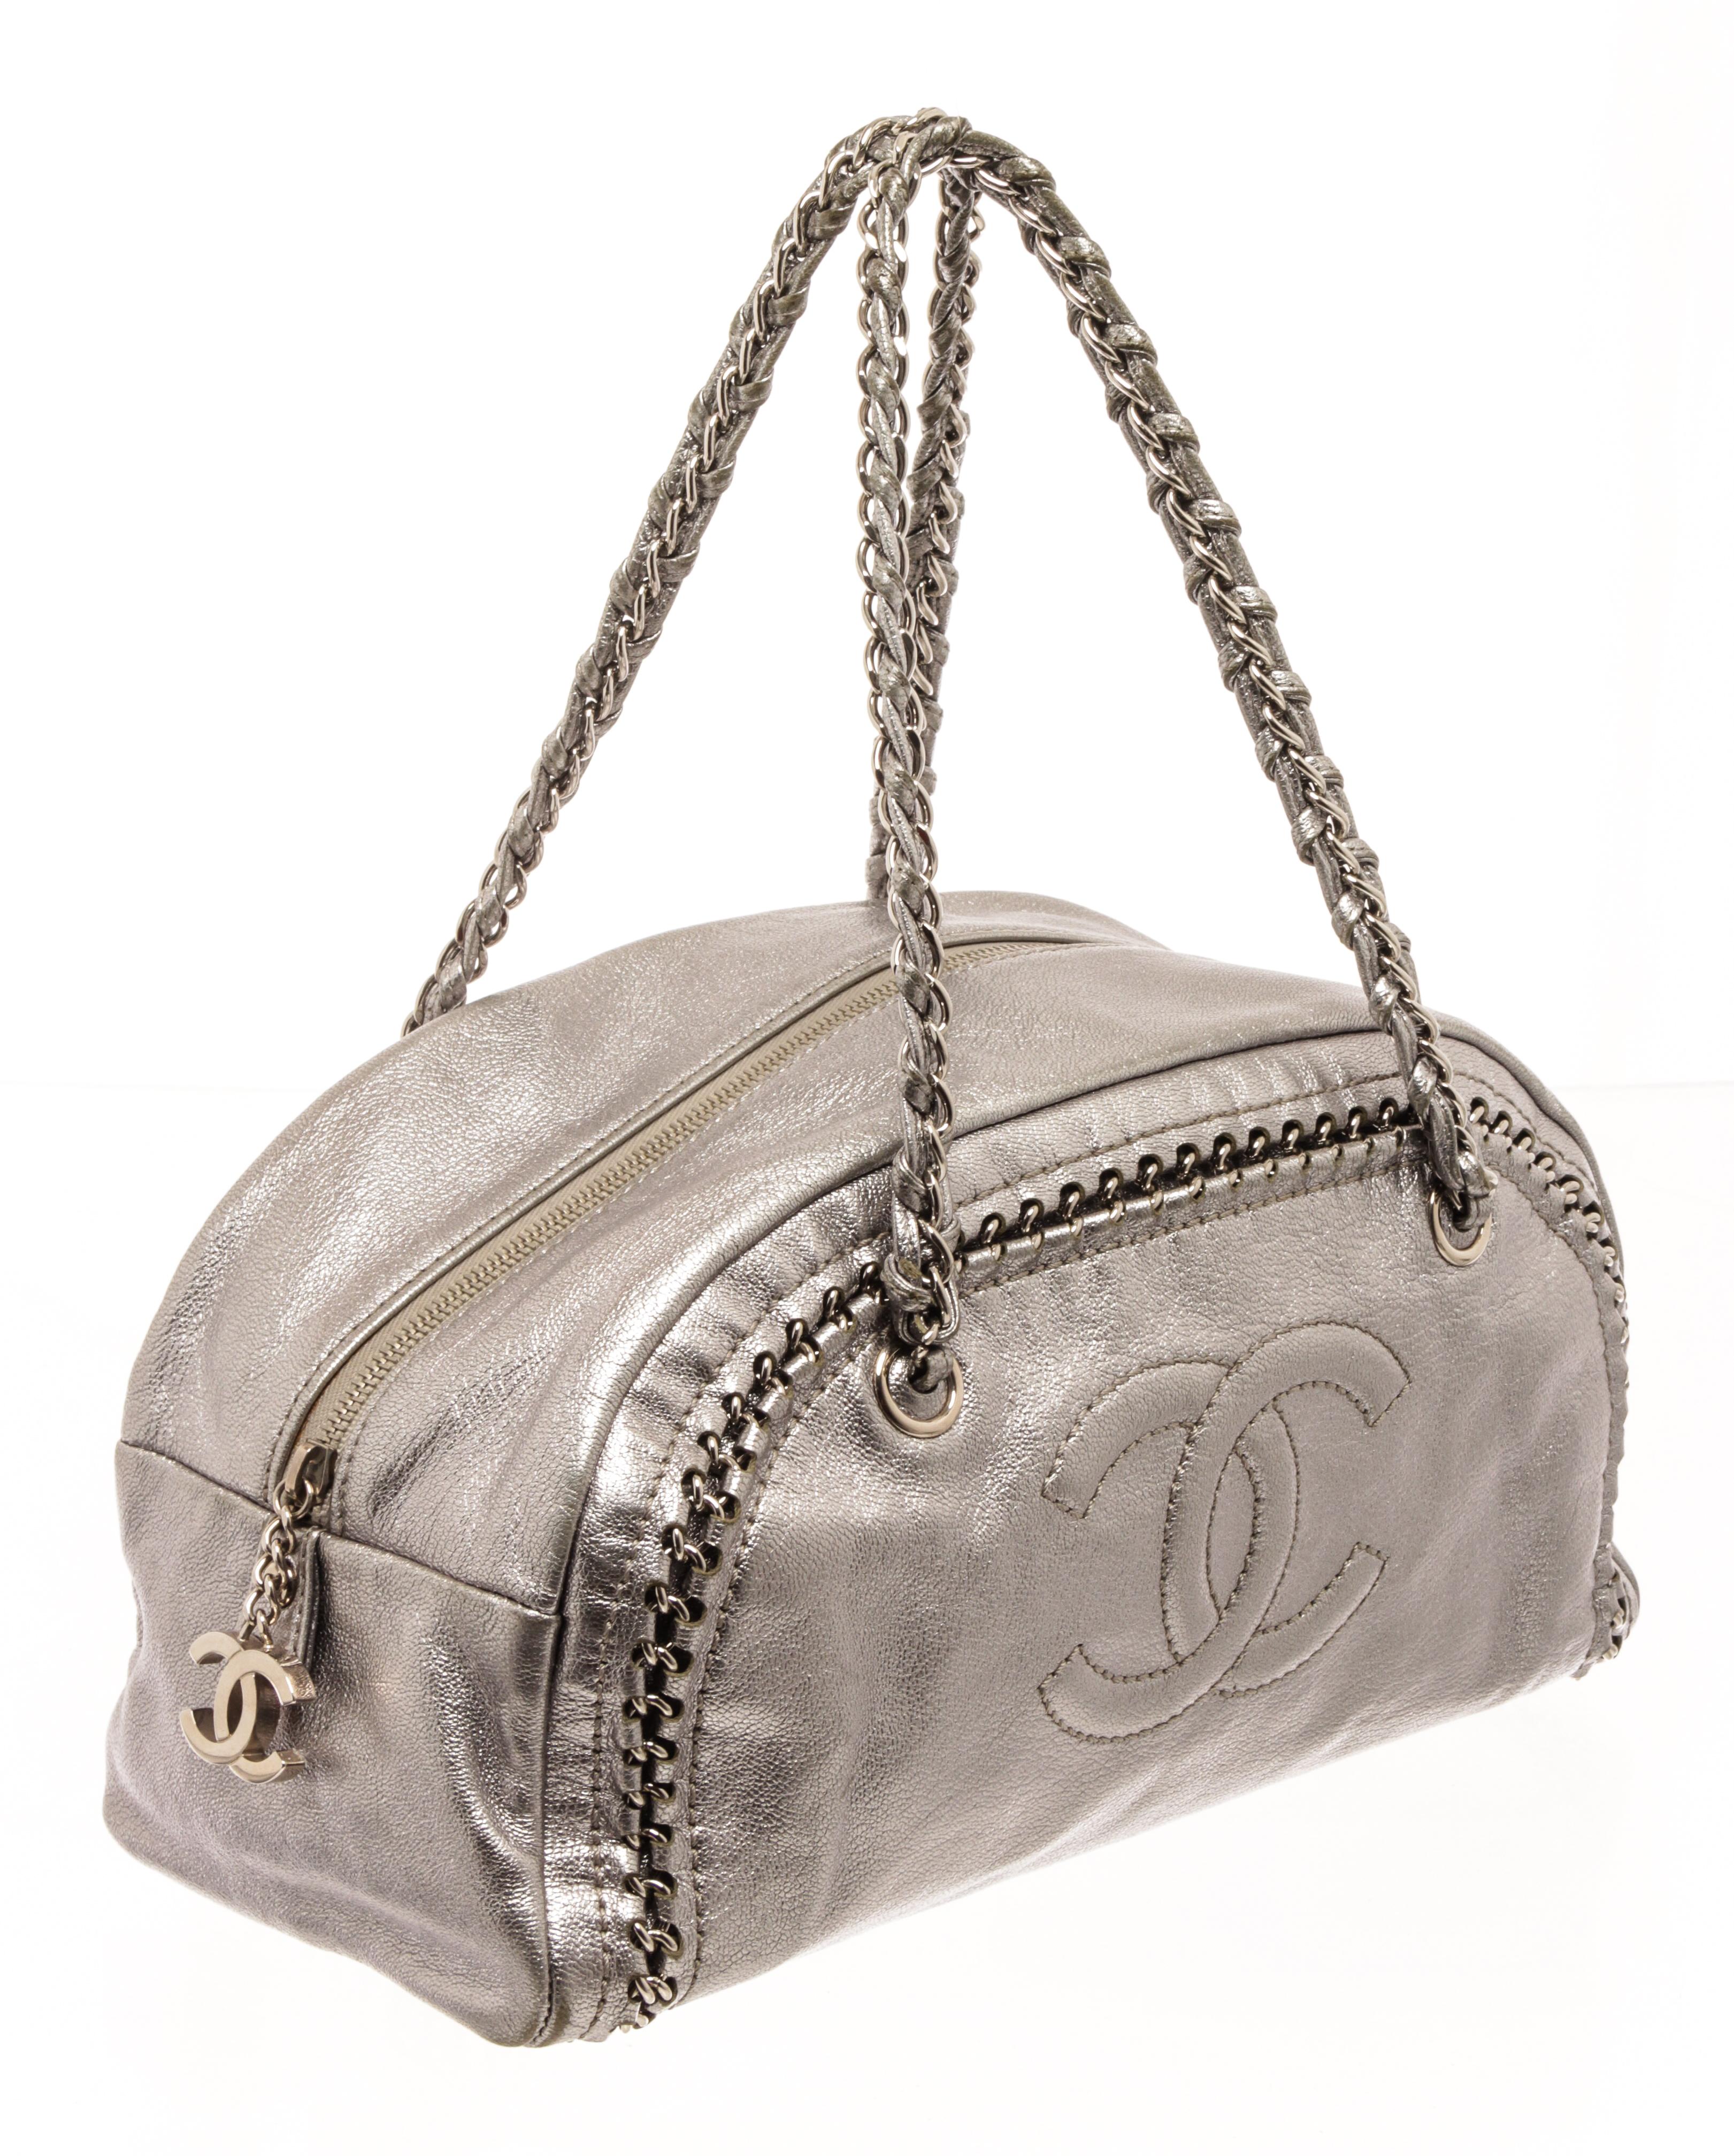 Chanel Silver Leather Doctor Shoulder Bag with silver grained leather exterior, silver chain strap, leather lining, interior pocket, zipper closure. There are some markings on the lining as shown in photos. 

87505MSC